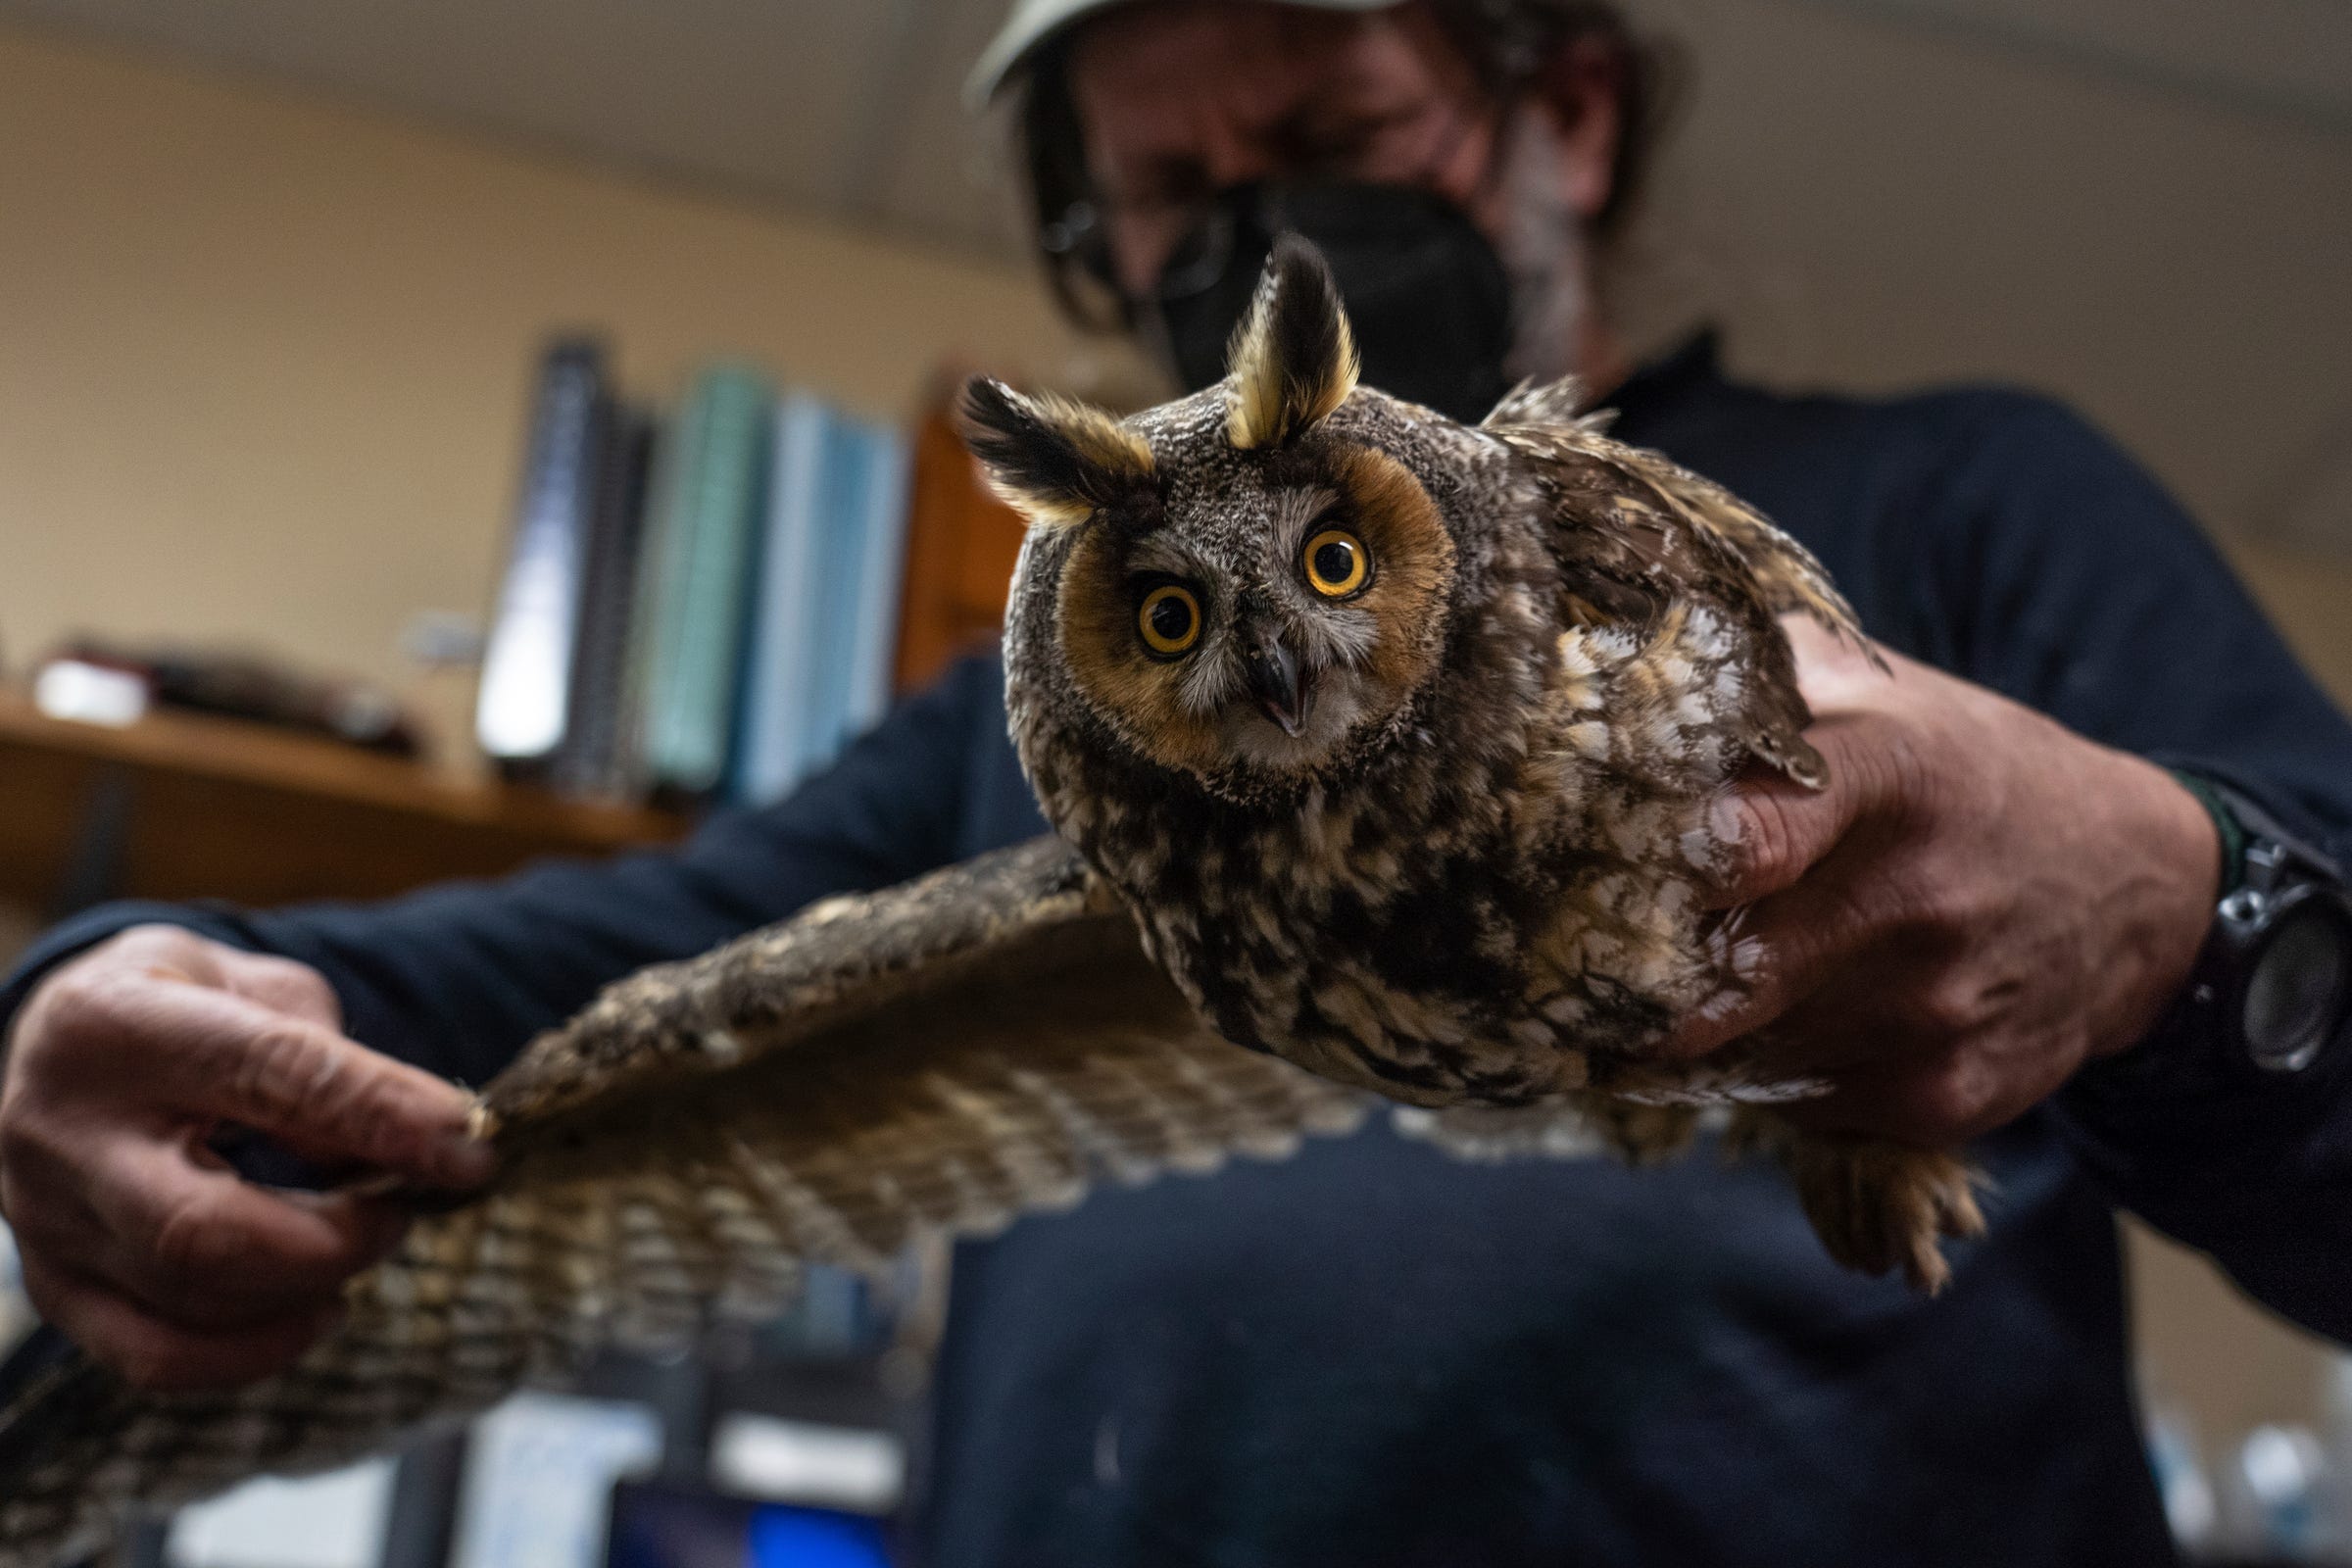 Owl bander Chris Neri checks the molt pattern on the wing of a long-eared owl that was captured while documenting and banding owls during their spring migration in a lab located in the back of a former gift shop at Whitefish Point Bird Observatory in Paradise located in Michigan's Upper Peninsula on Friday, April 21, 2023.